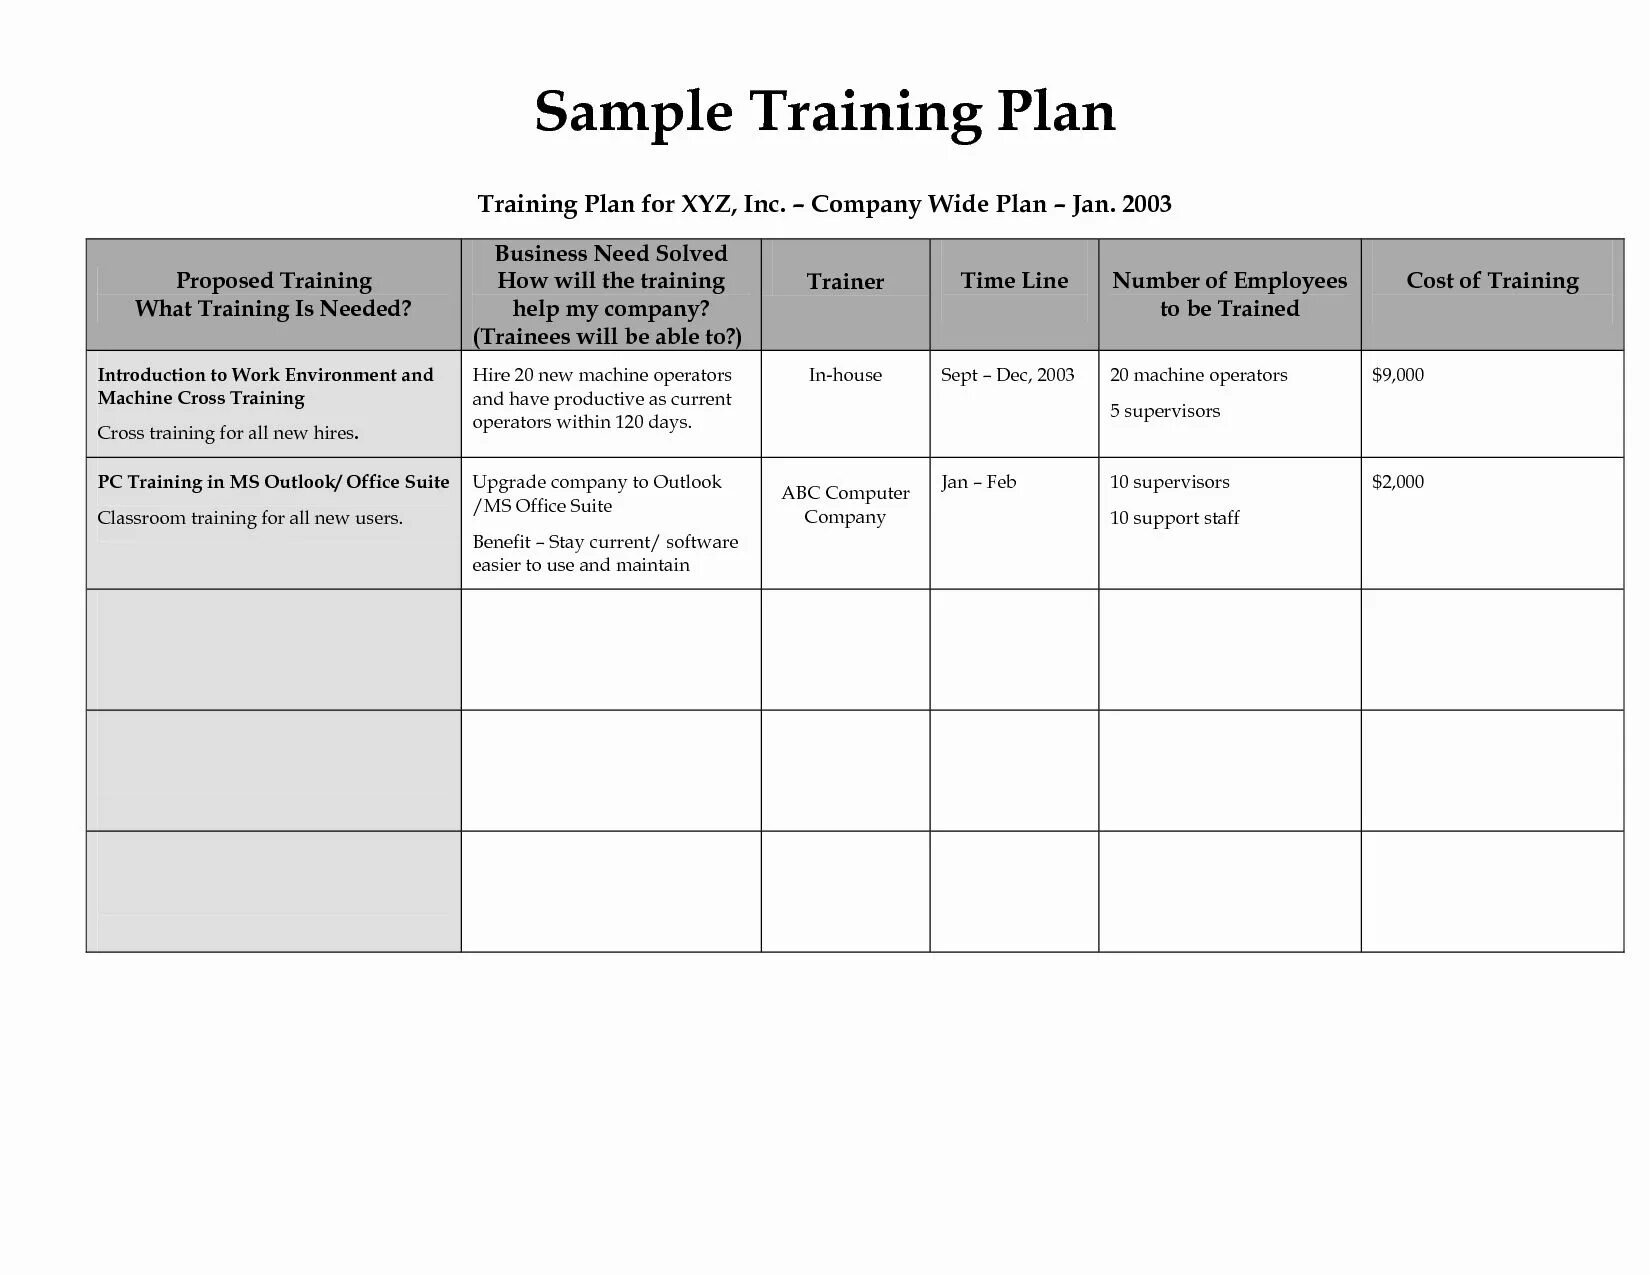 Training Plan. Training Plan Template. Training program examples. Training Plan текст. The training plan